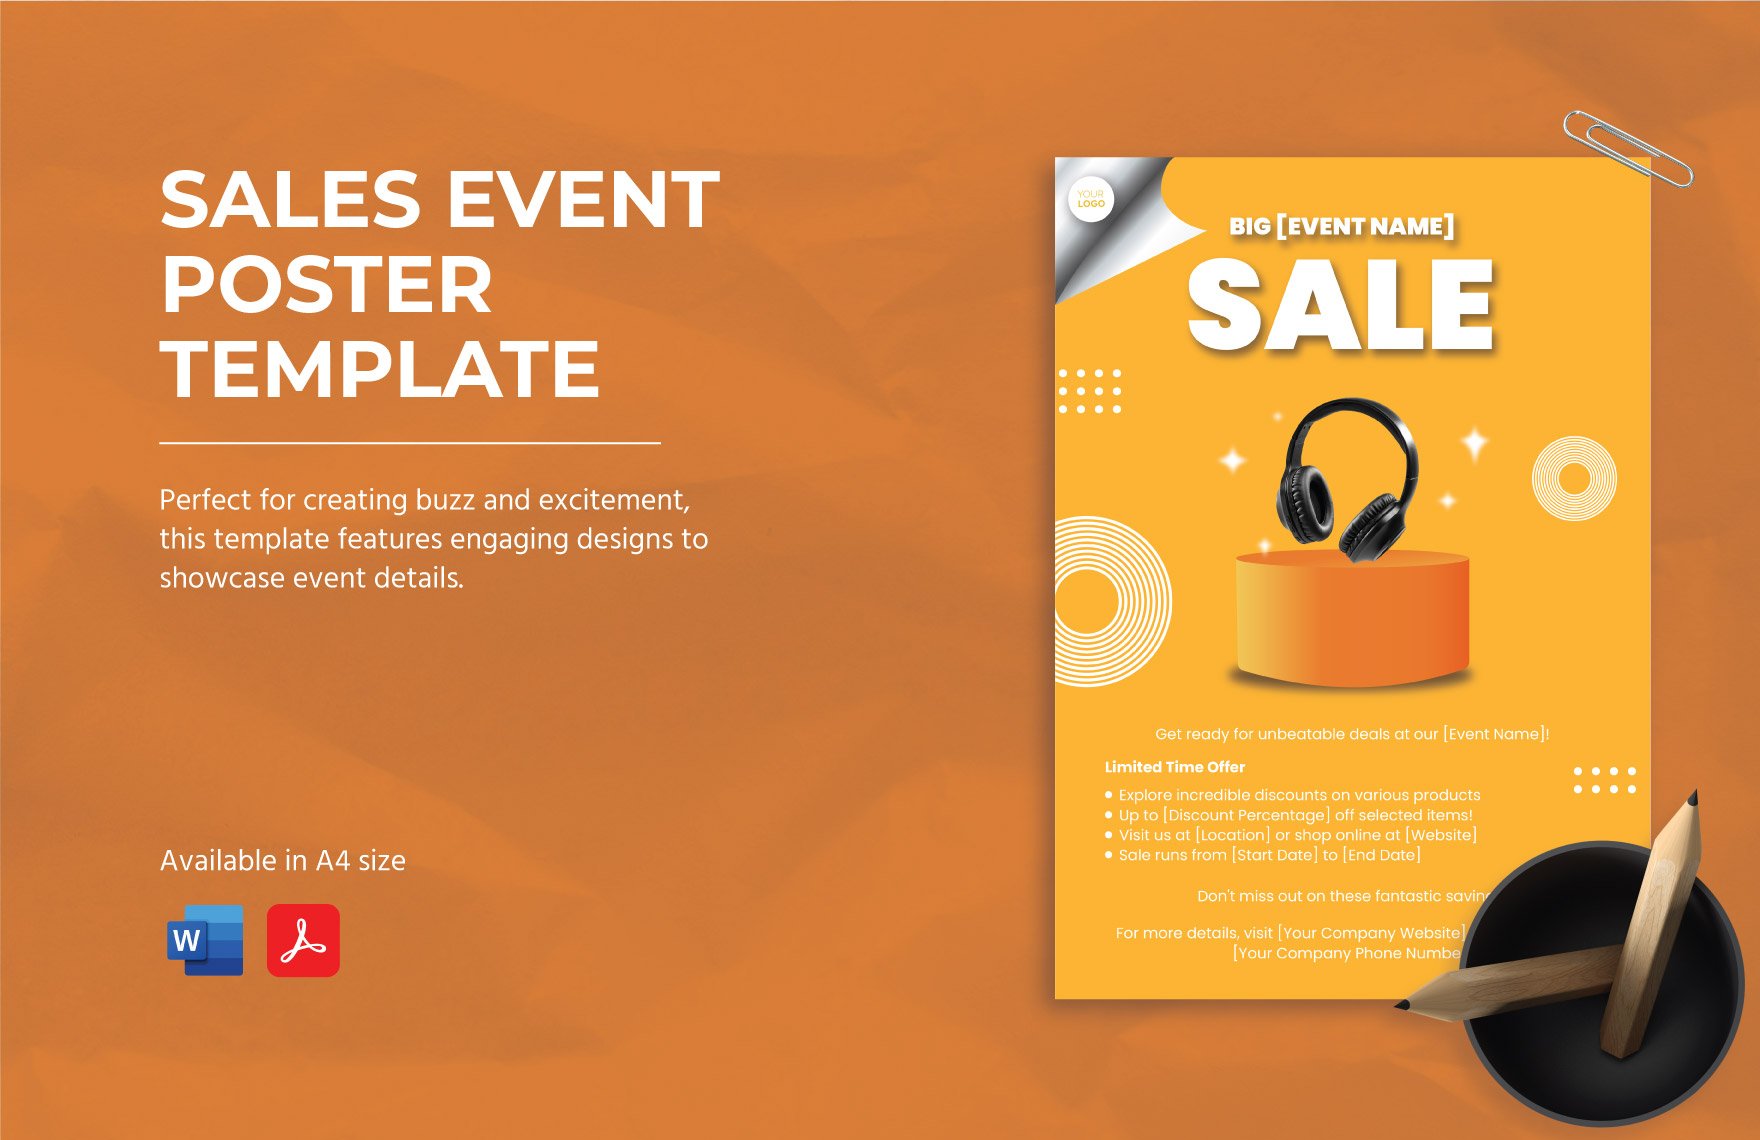 Sales Event Poster Template